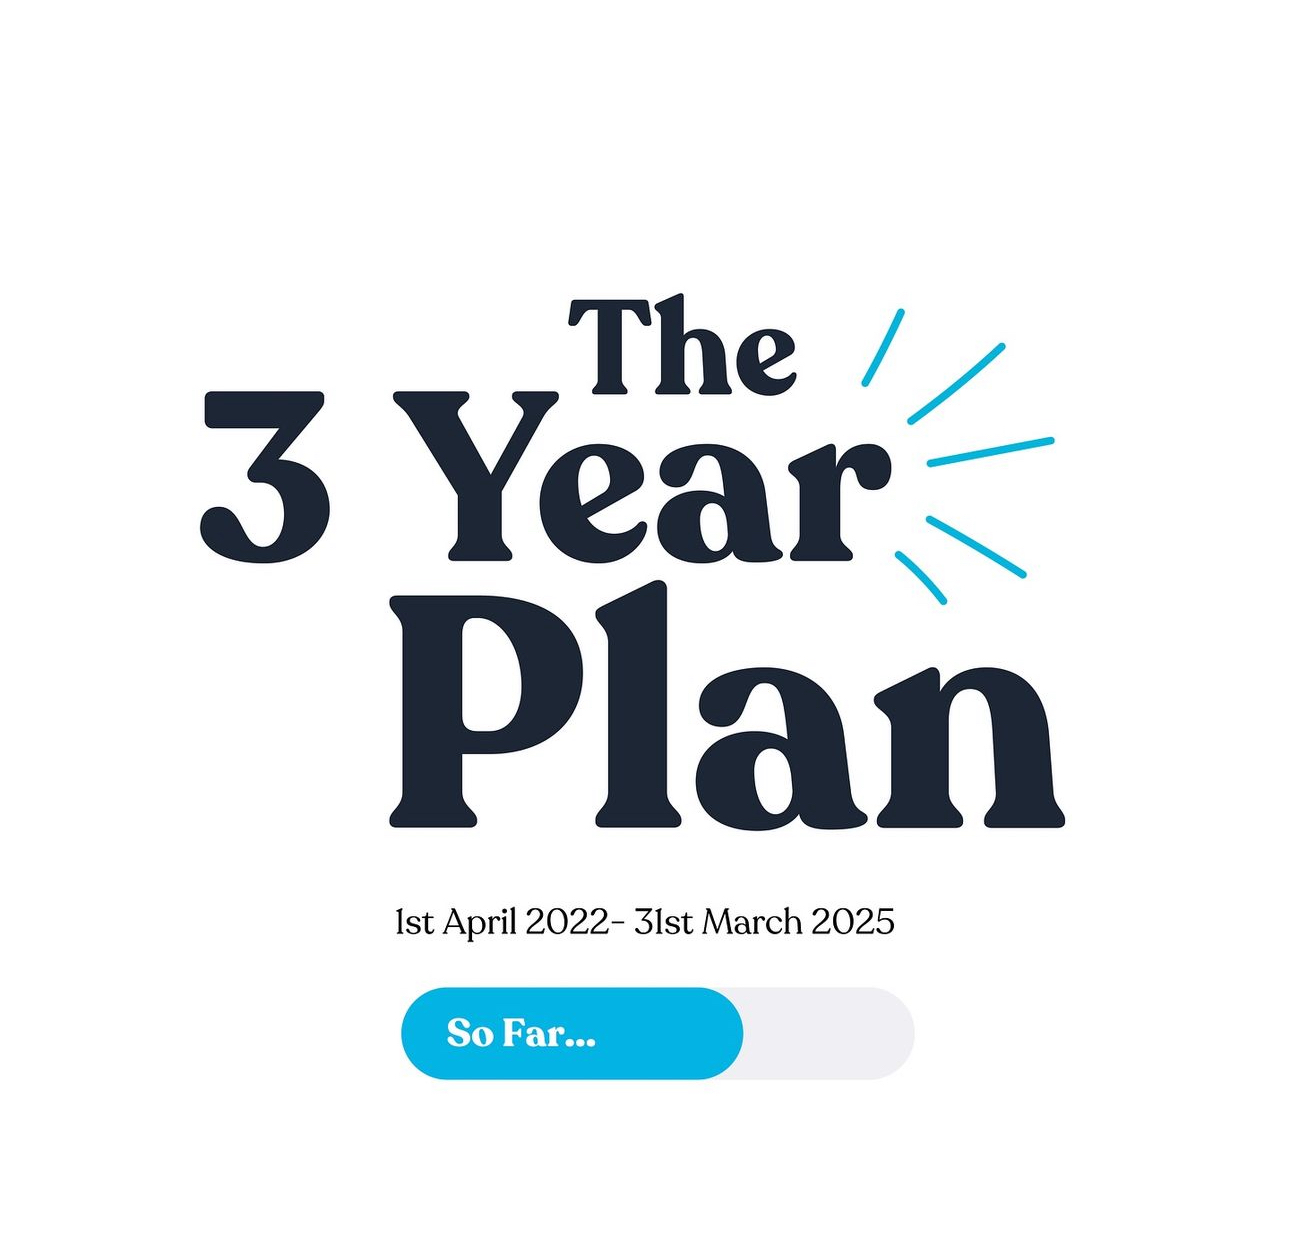 Entering the final year of the Three Year Plan image